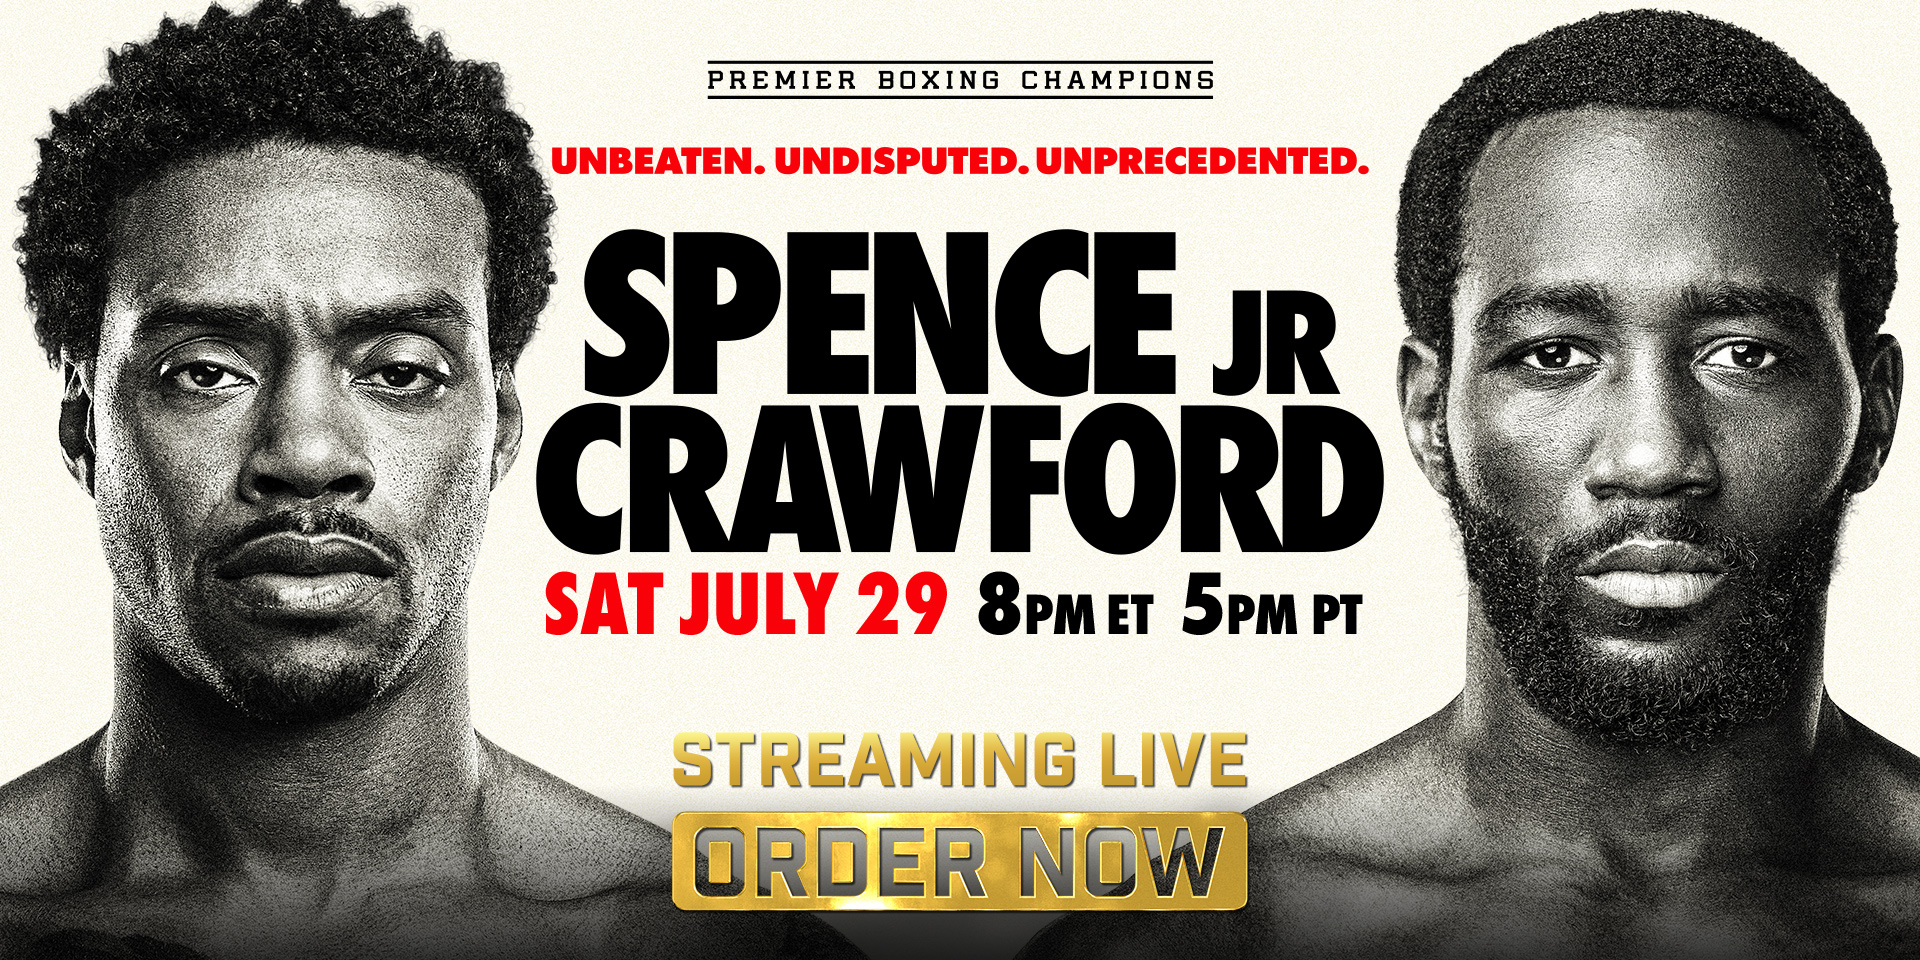 Errol Spence Jr. vs. Terence Crawford: Live Stream, Betting Odds & Fight Card